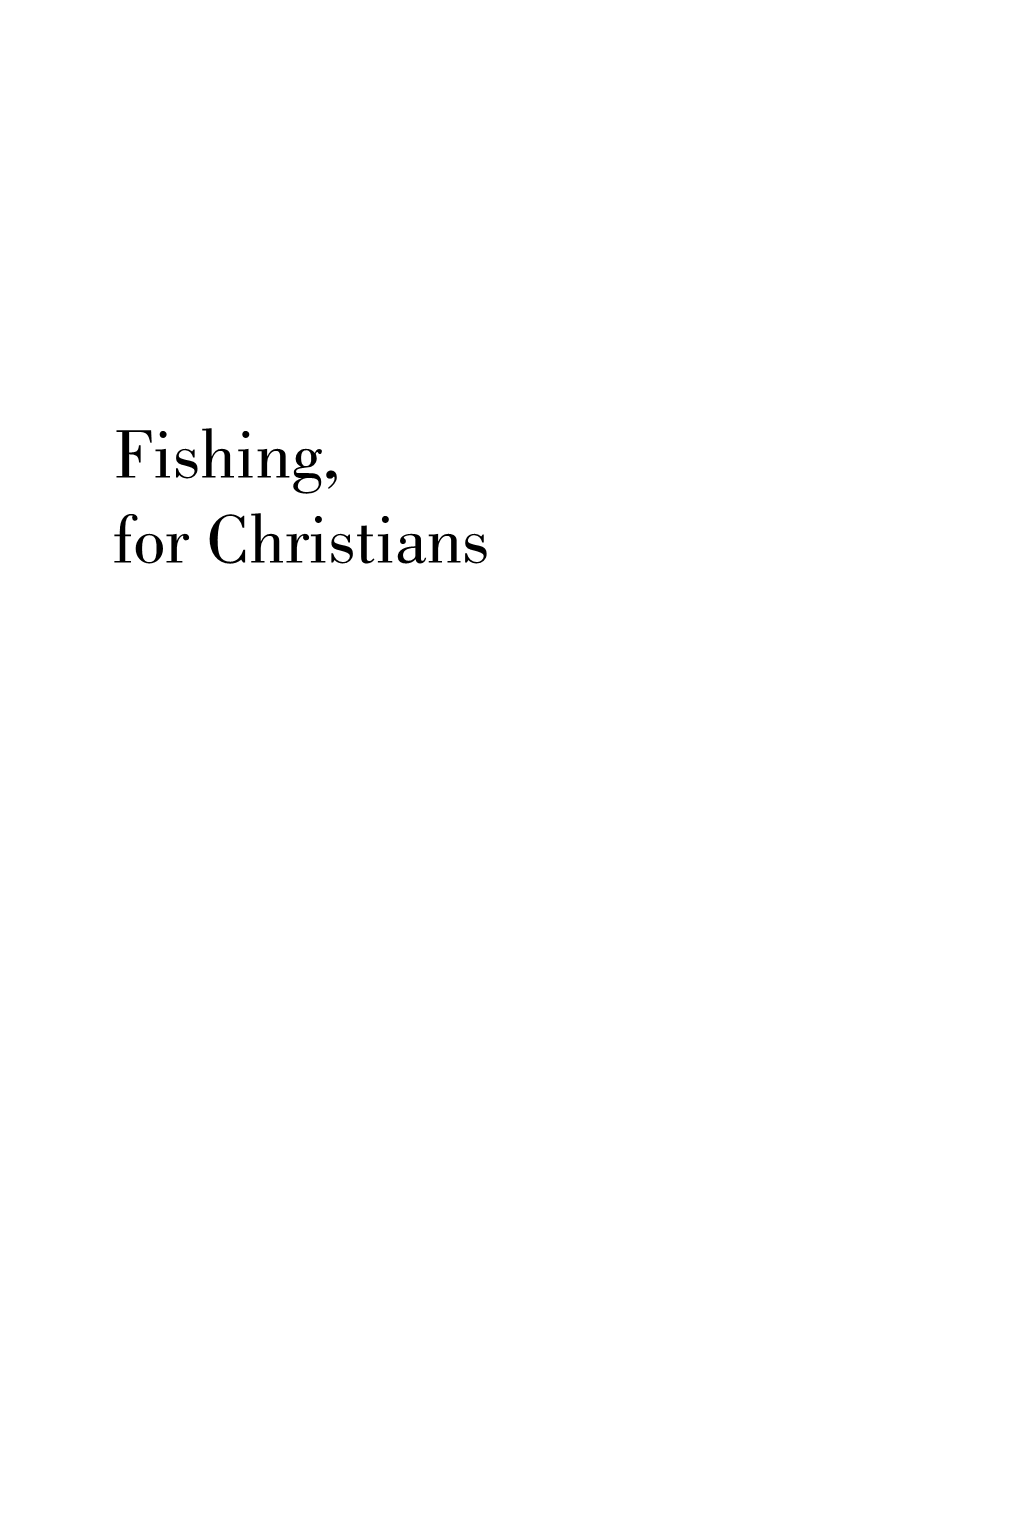 Fishing for Christians by Tim Roux